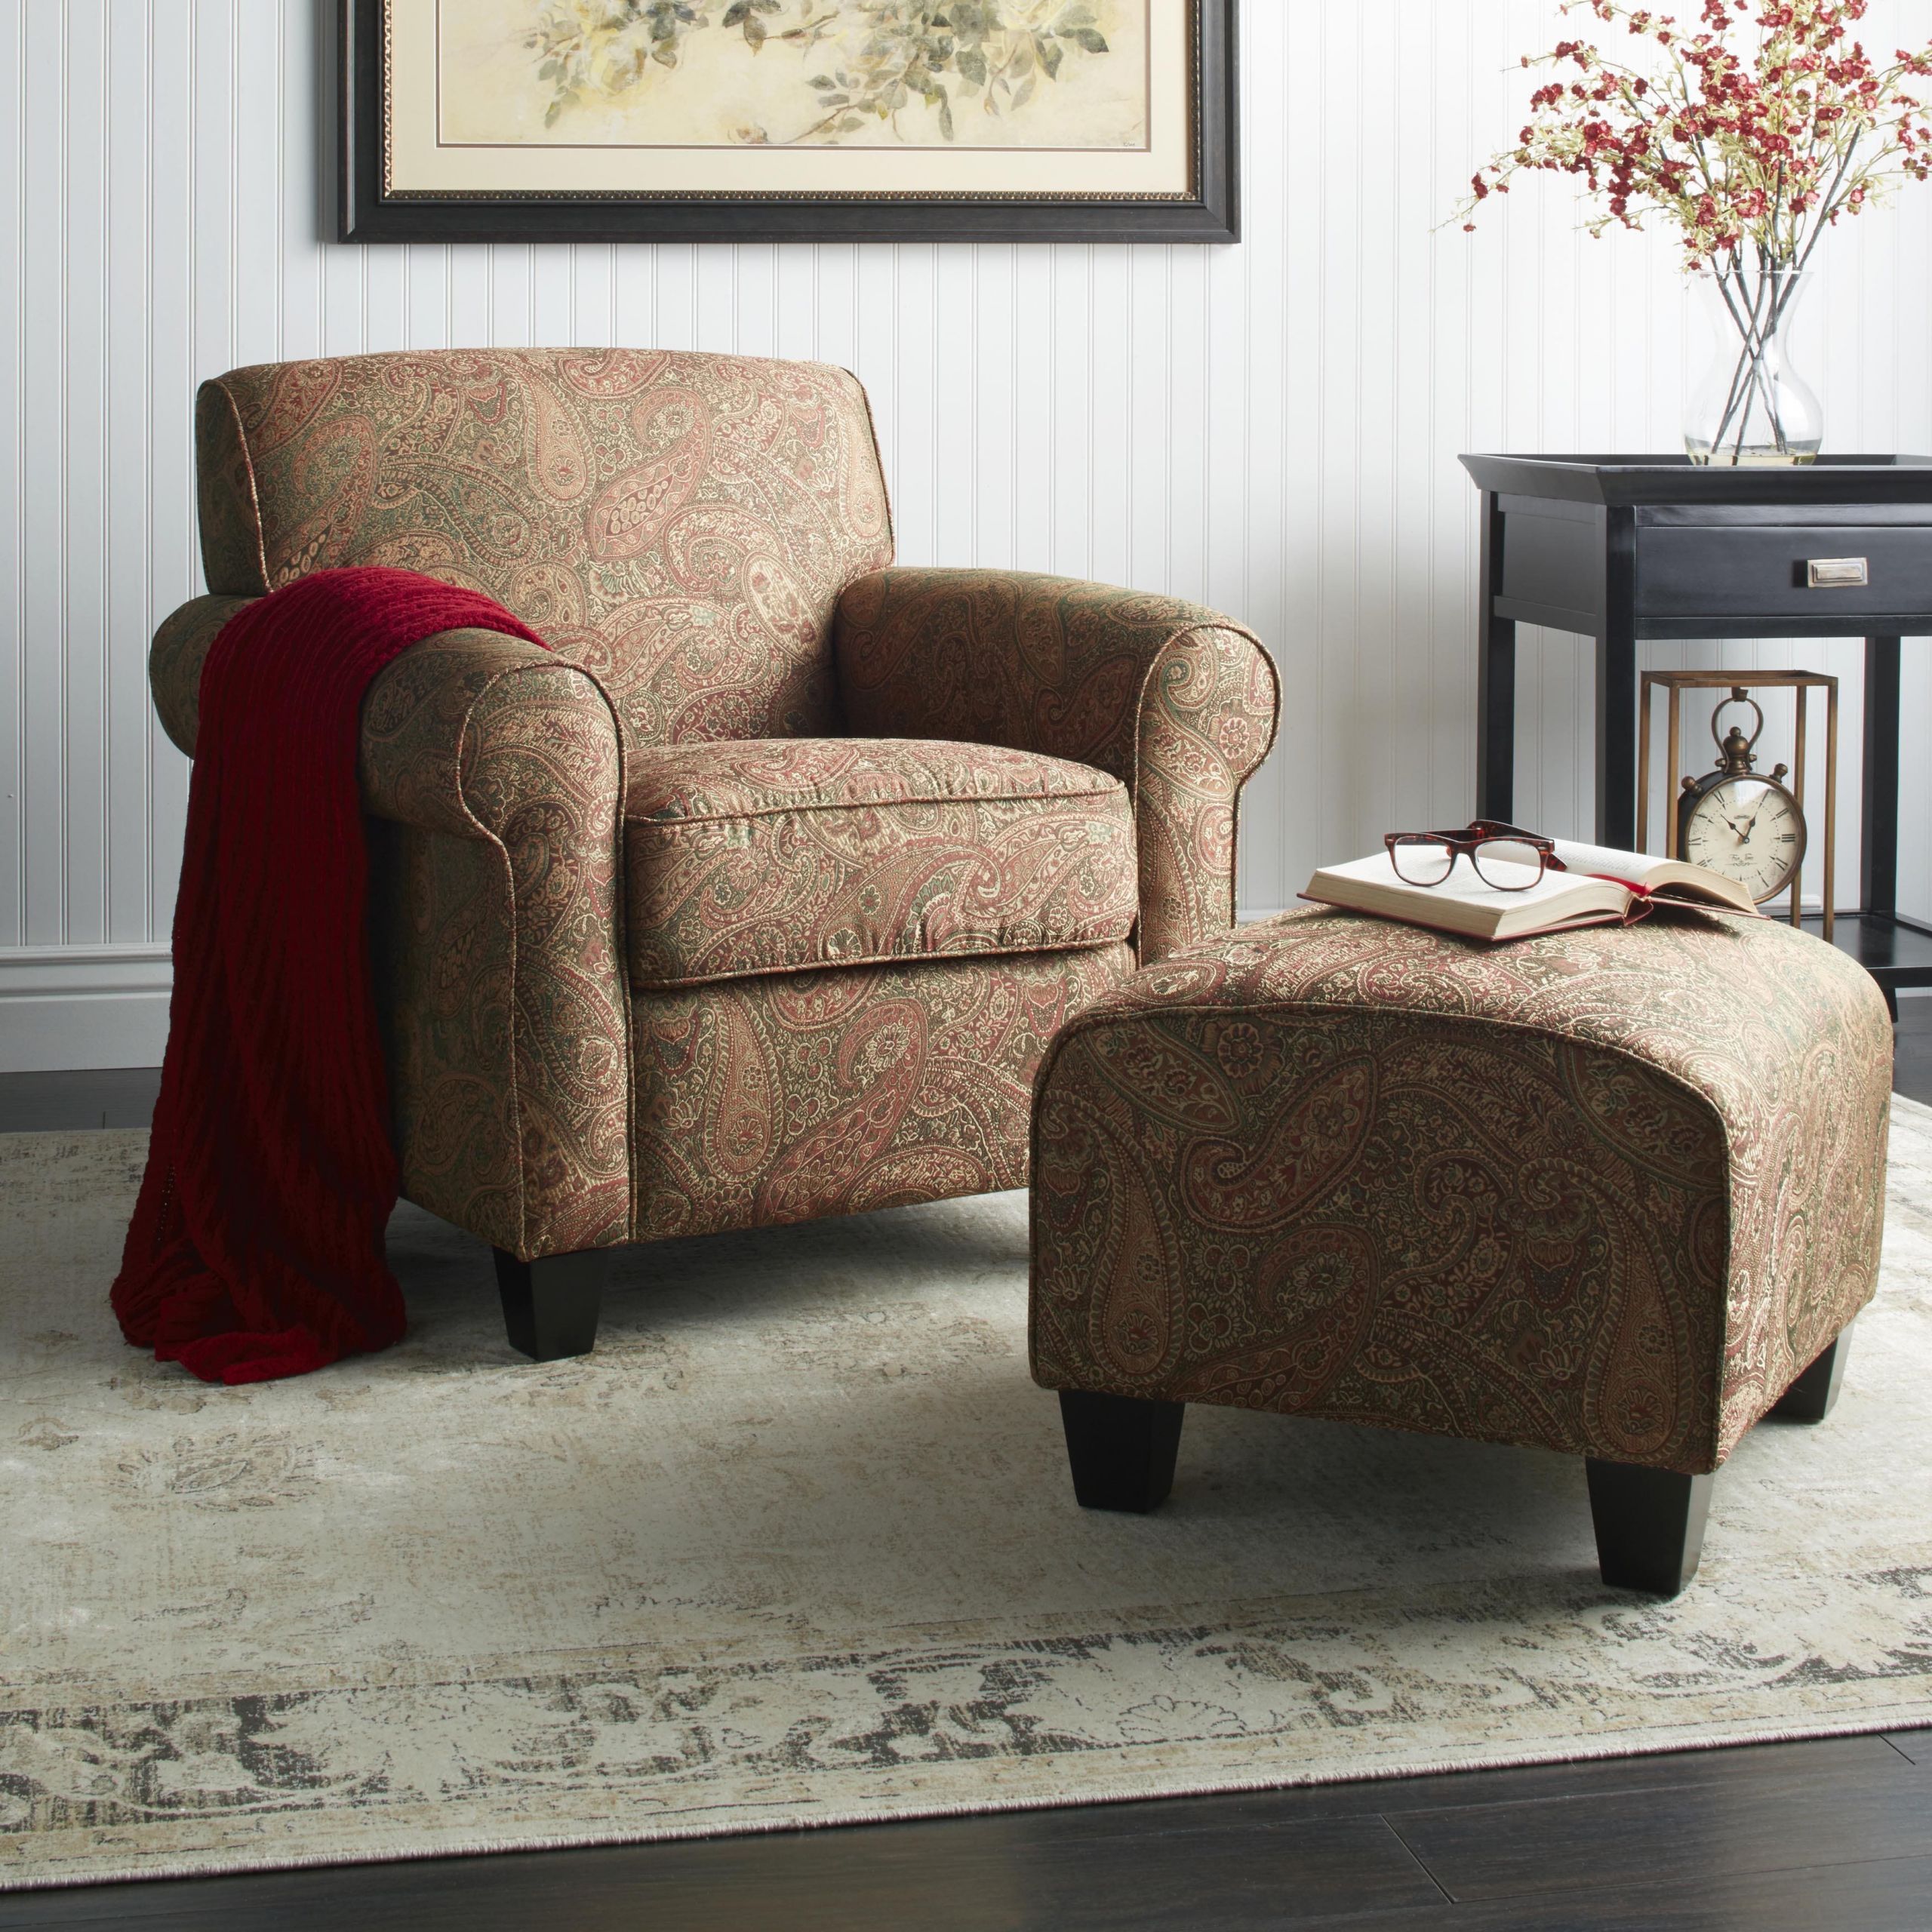 Overstock Living Room Chairs
 Buy Living Room Chairs line at Overstock